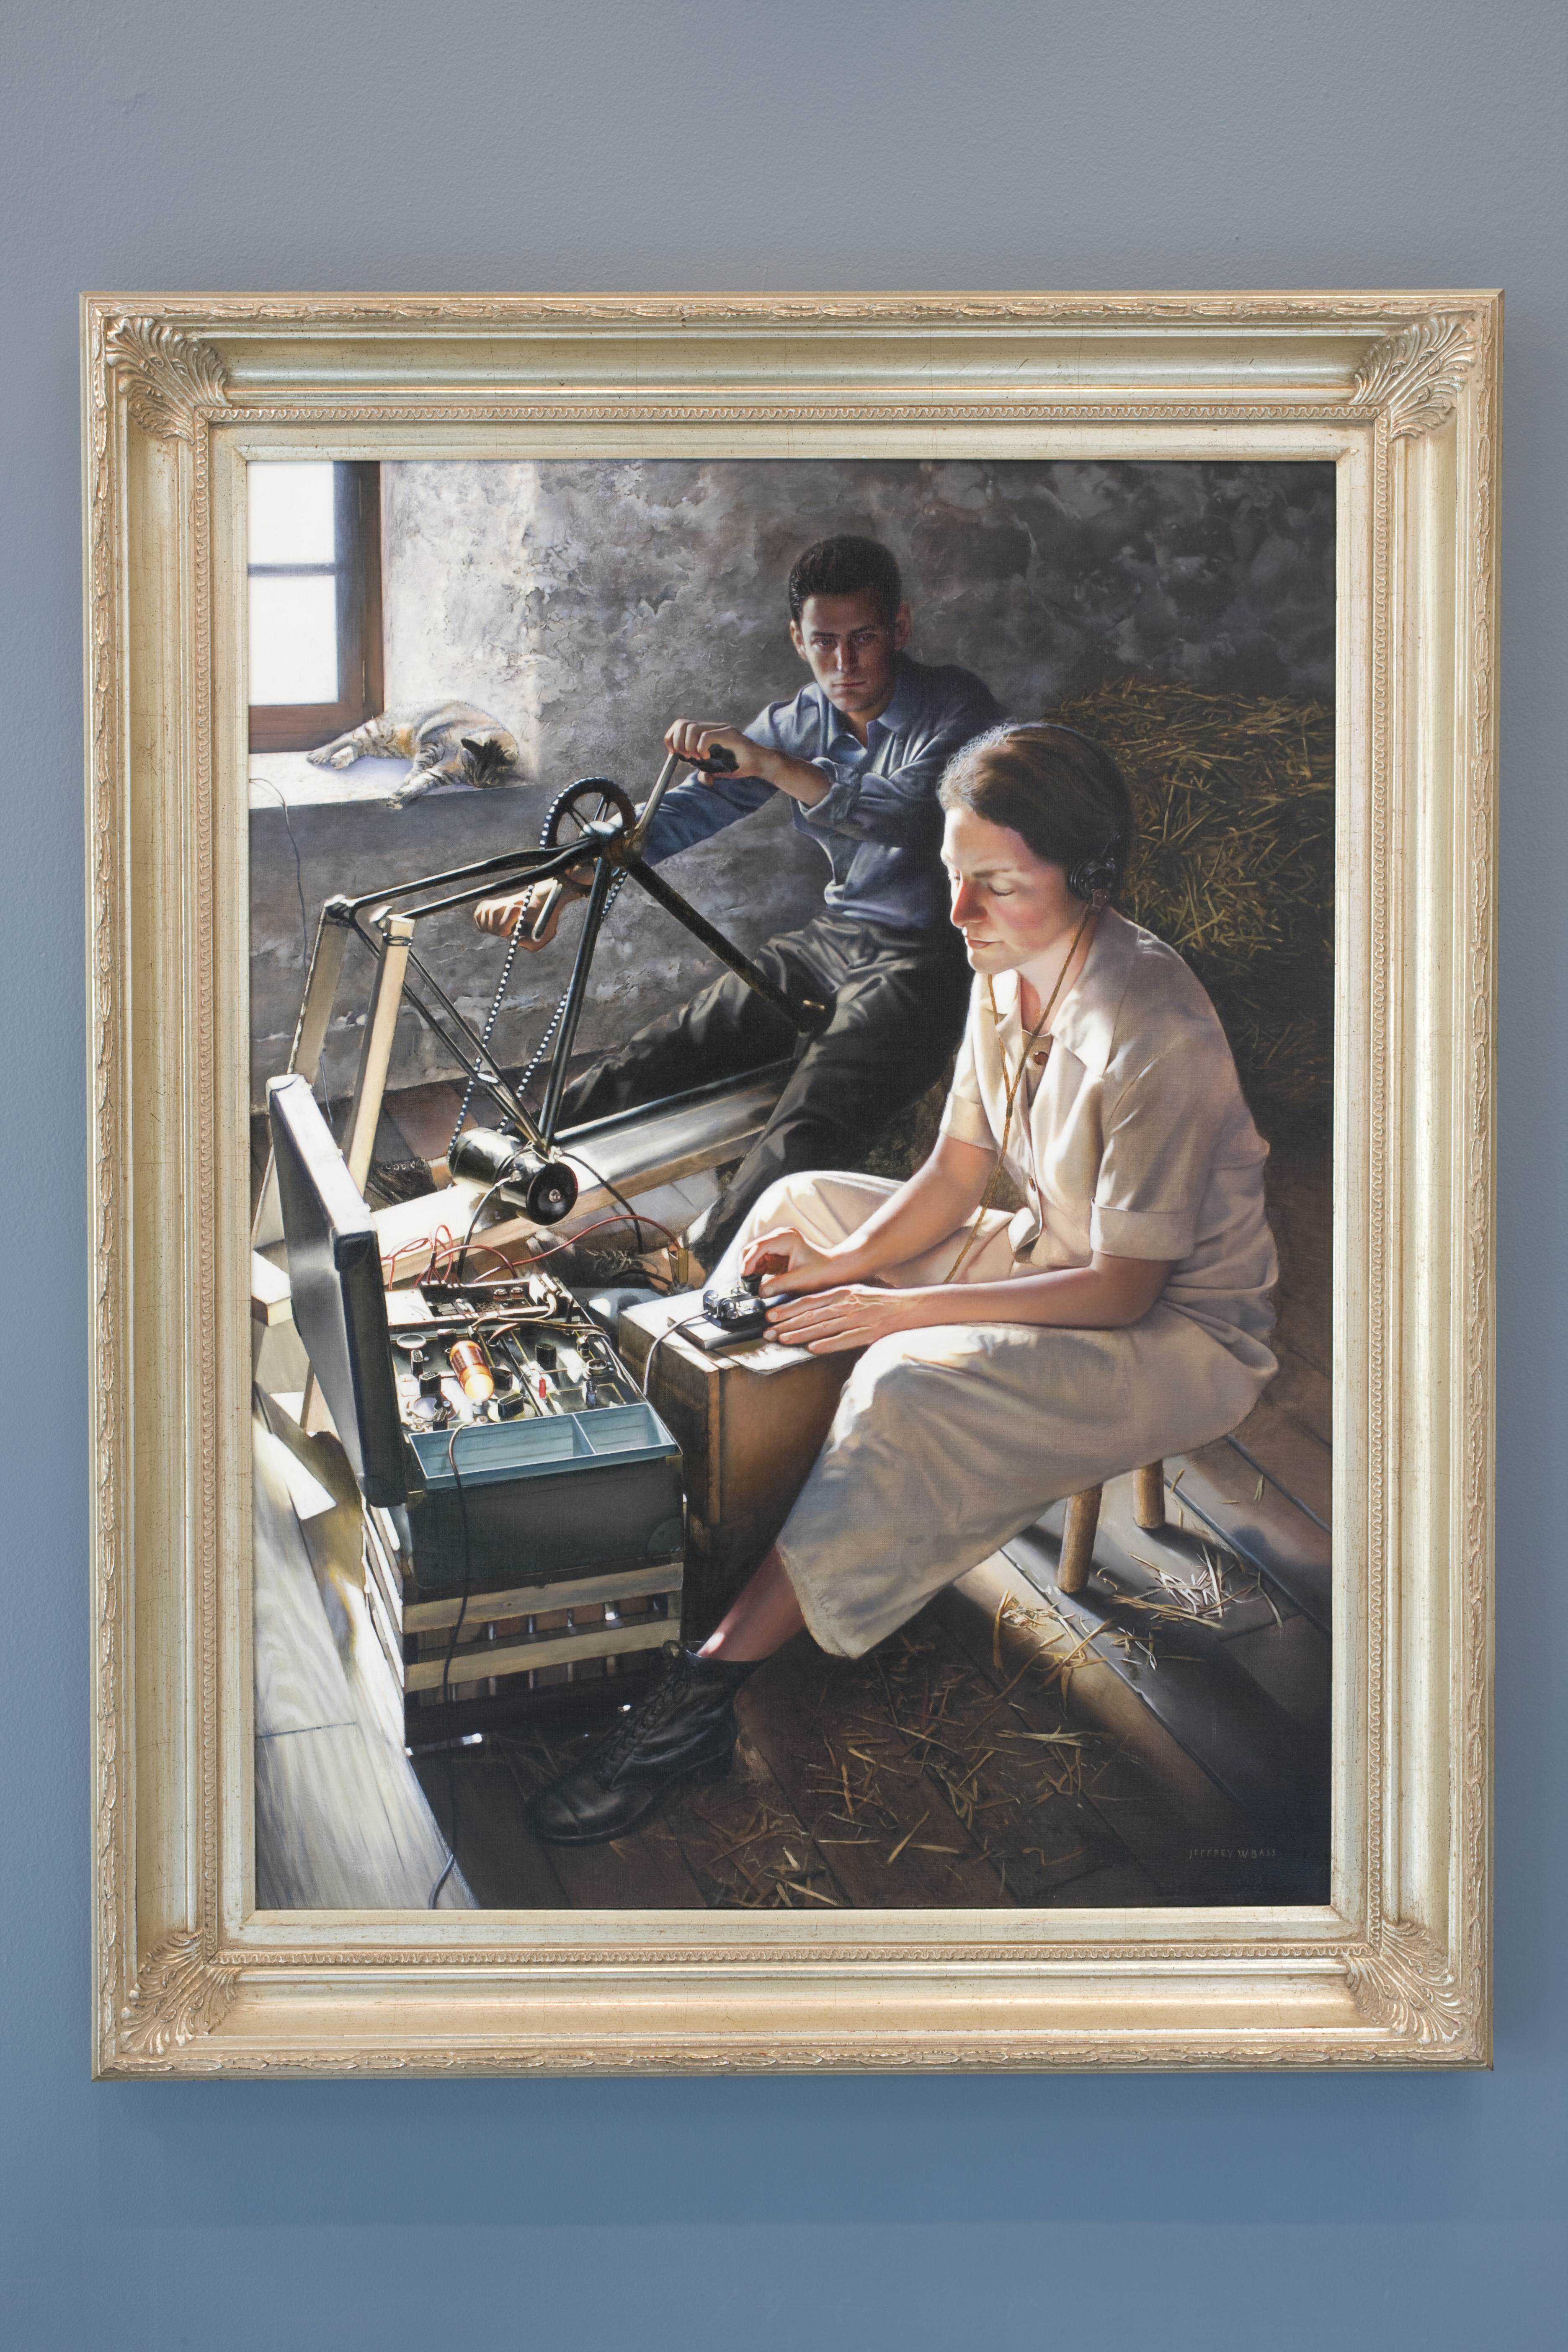 A framed painting of Virginia Hall using a hand wound radio to contact allied forces in London